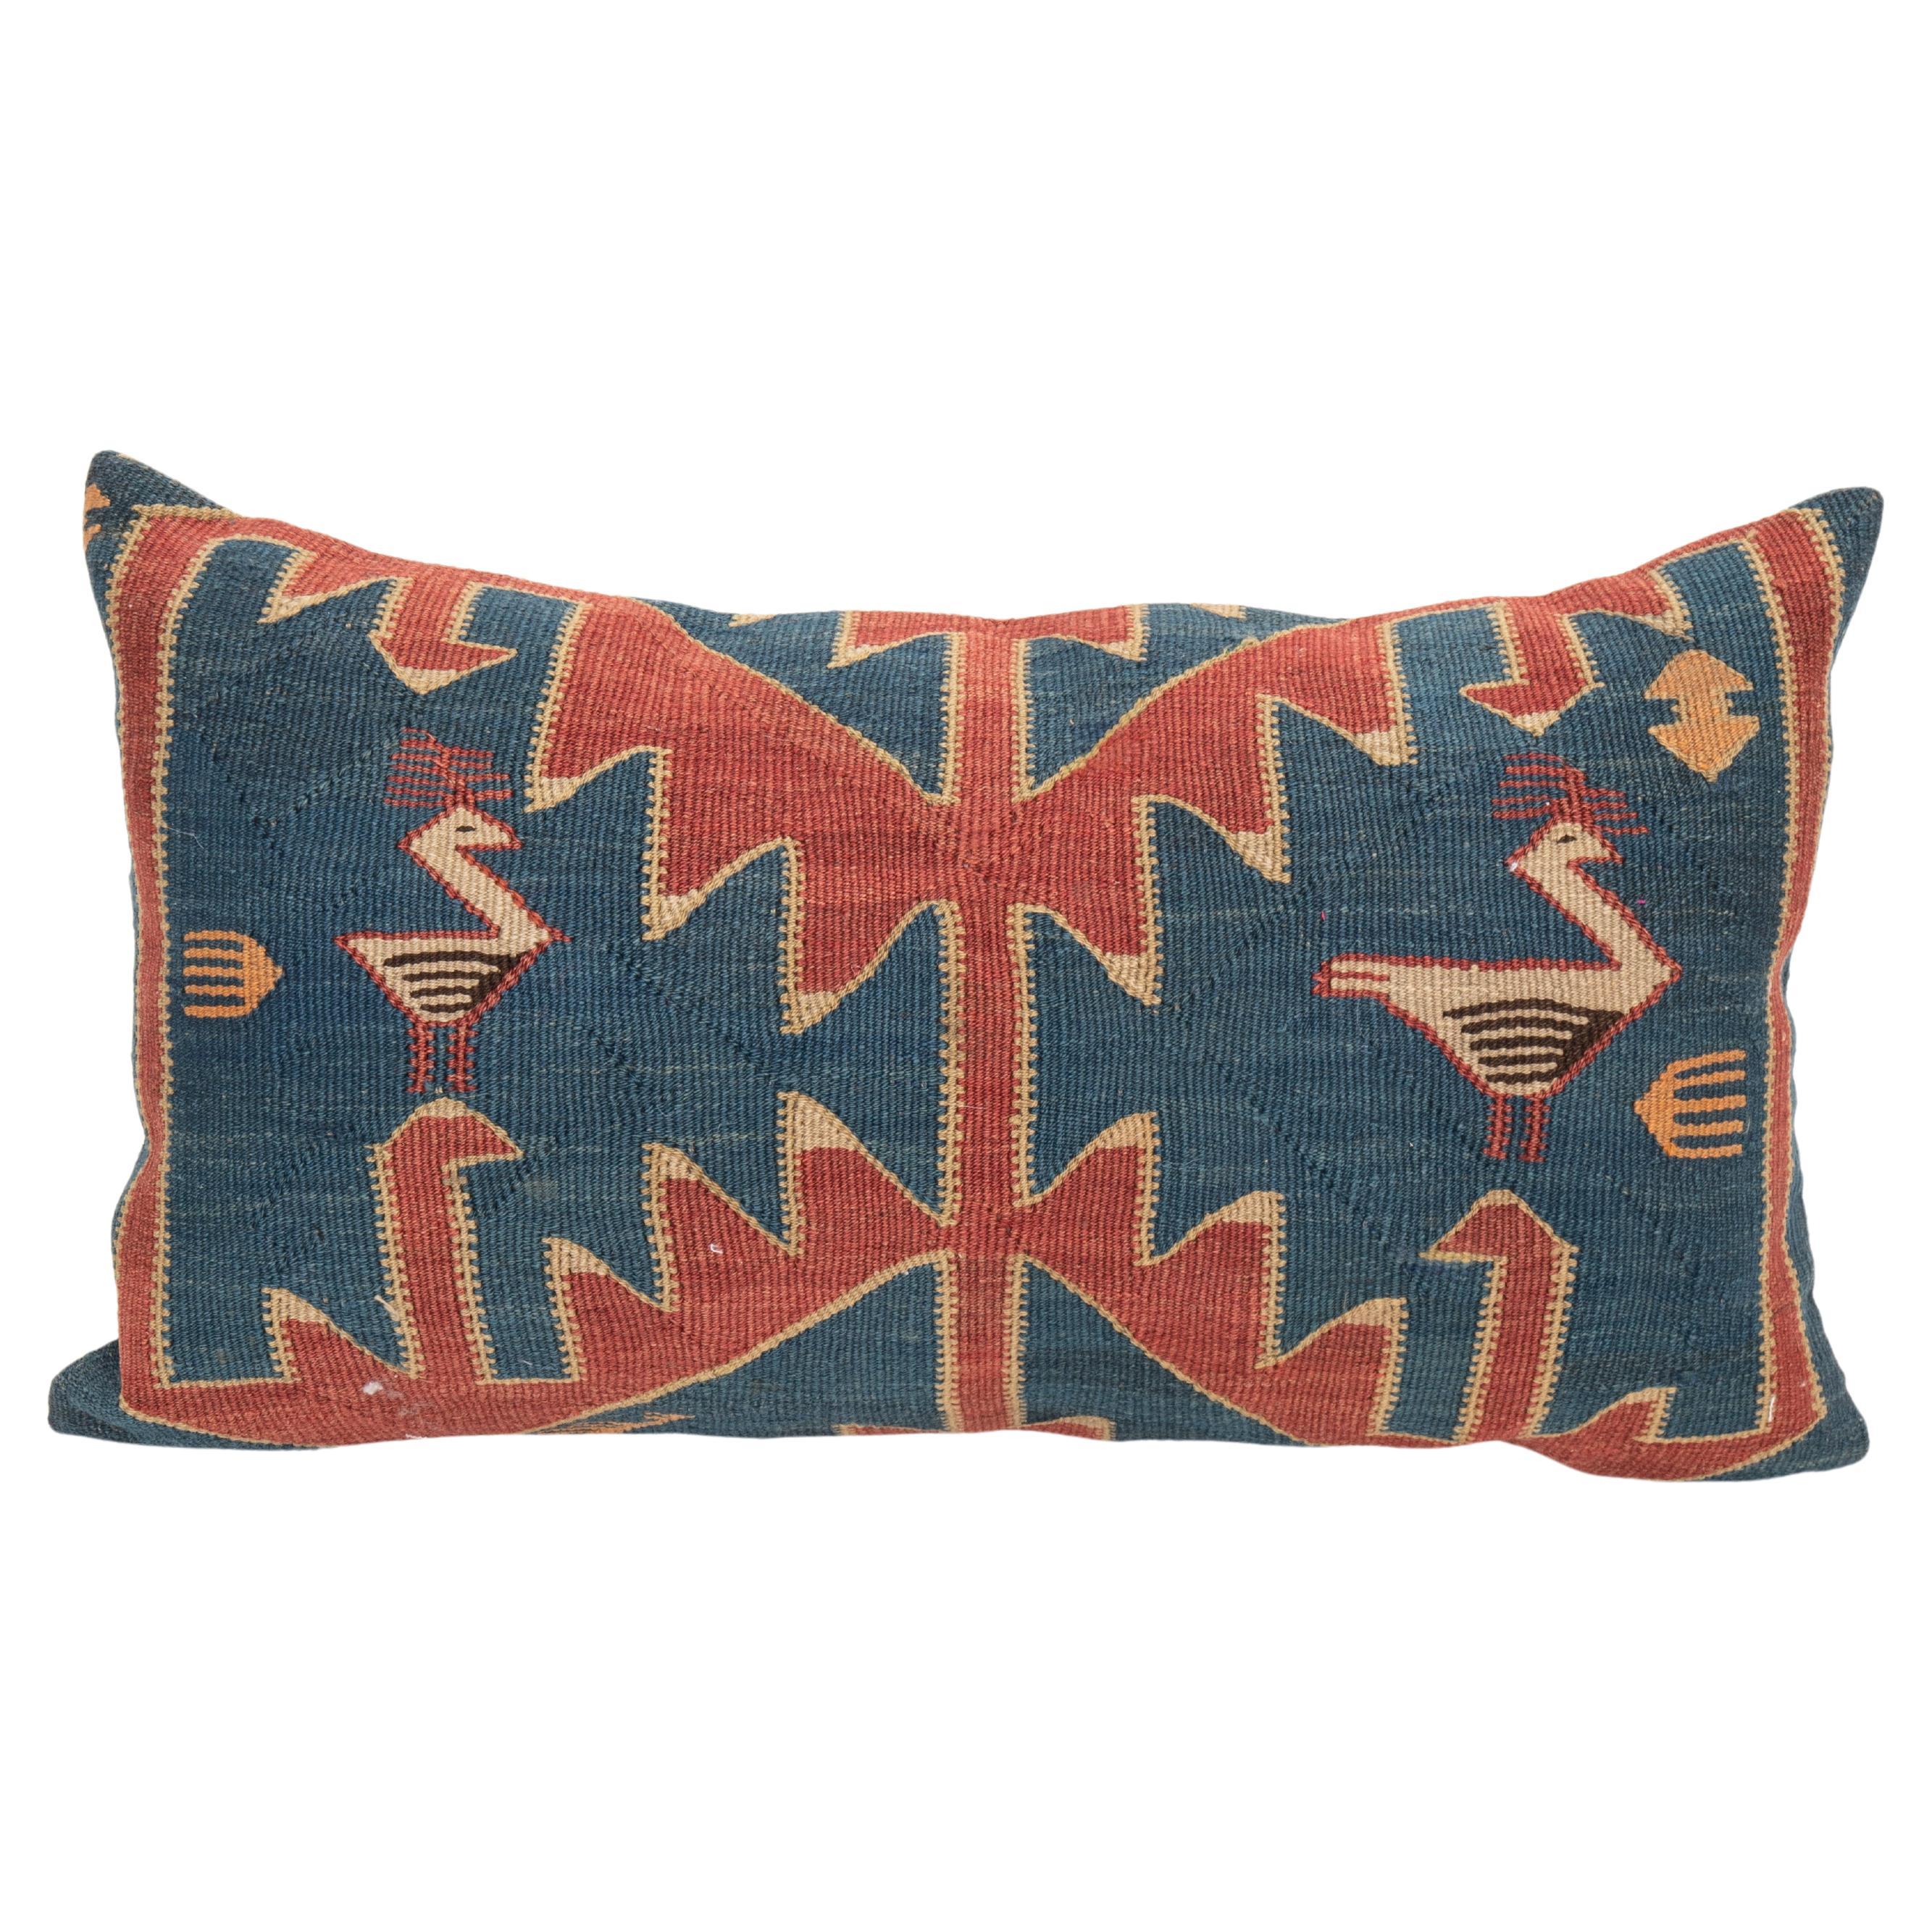 Cushion Made from an Antique Avar Kilim from Dagestan , Early 20th C.